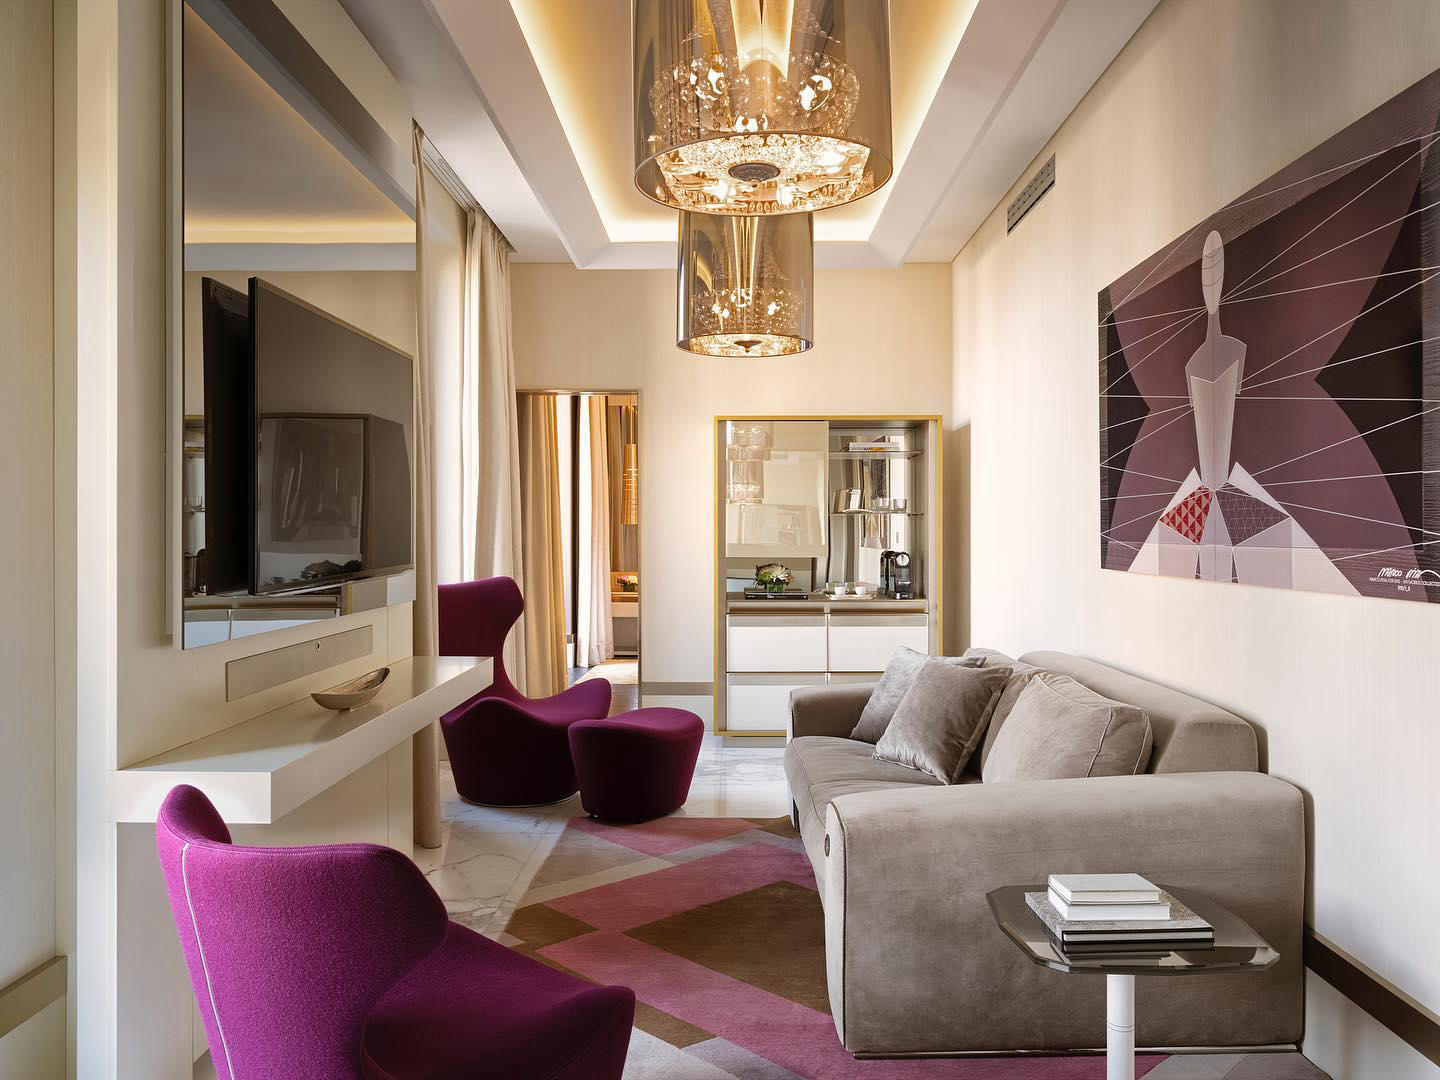 image  1 Excelsior Hotel Gallia, Milan - Surprise your loved ones with a trip to Milan during the sales week